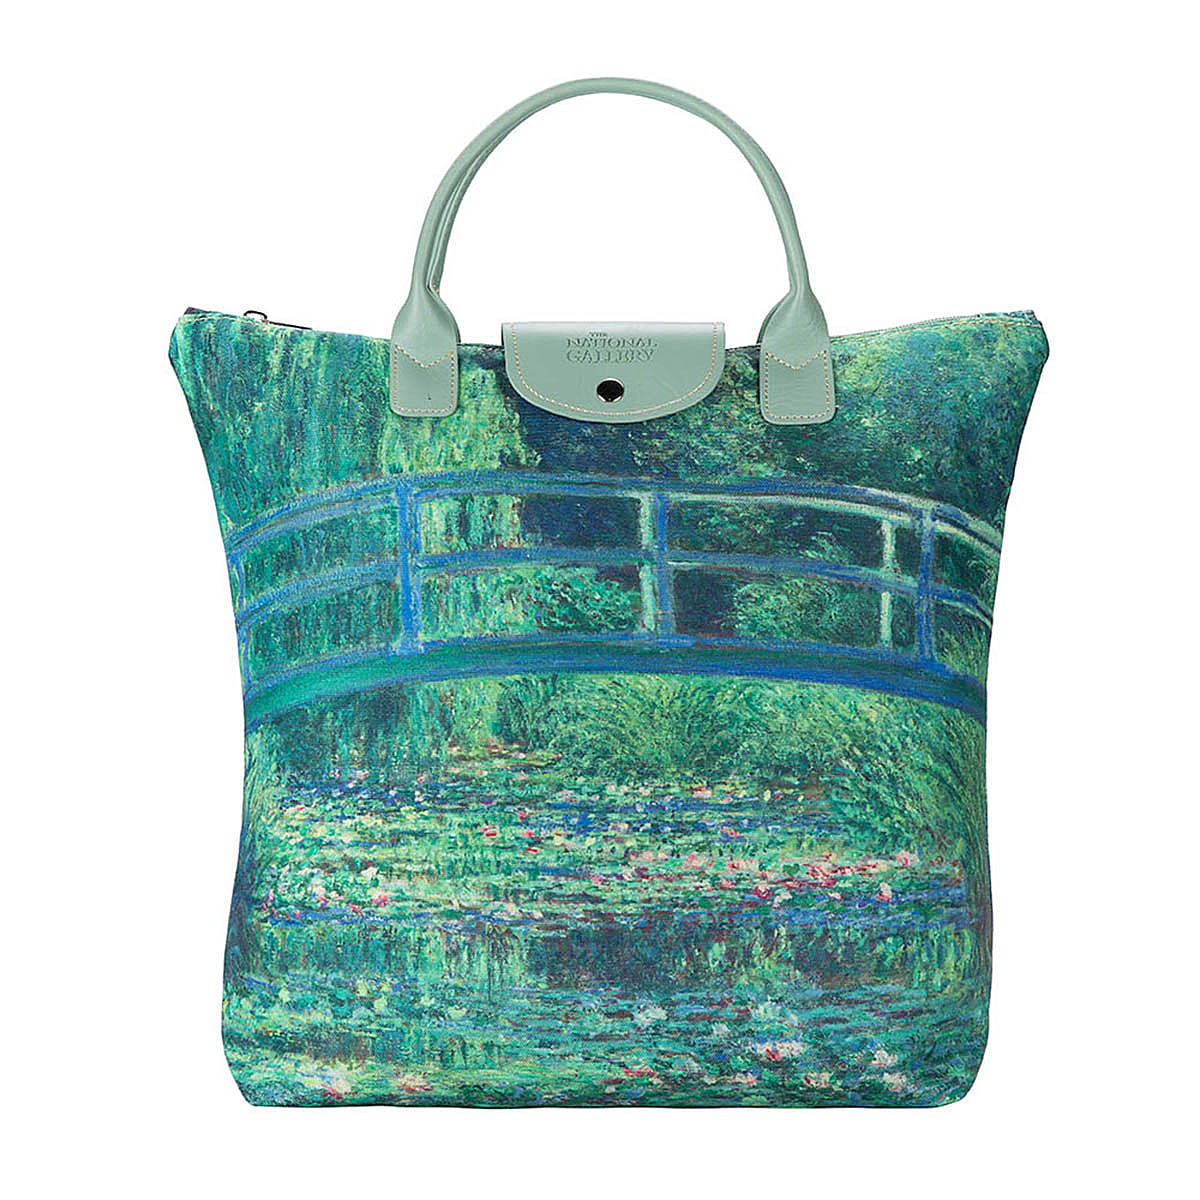 Signare Tapestry Foldaway Bag - Art - Monet - The Water Lily Pond - Light Green